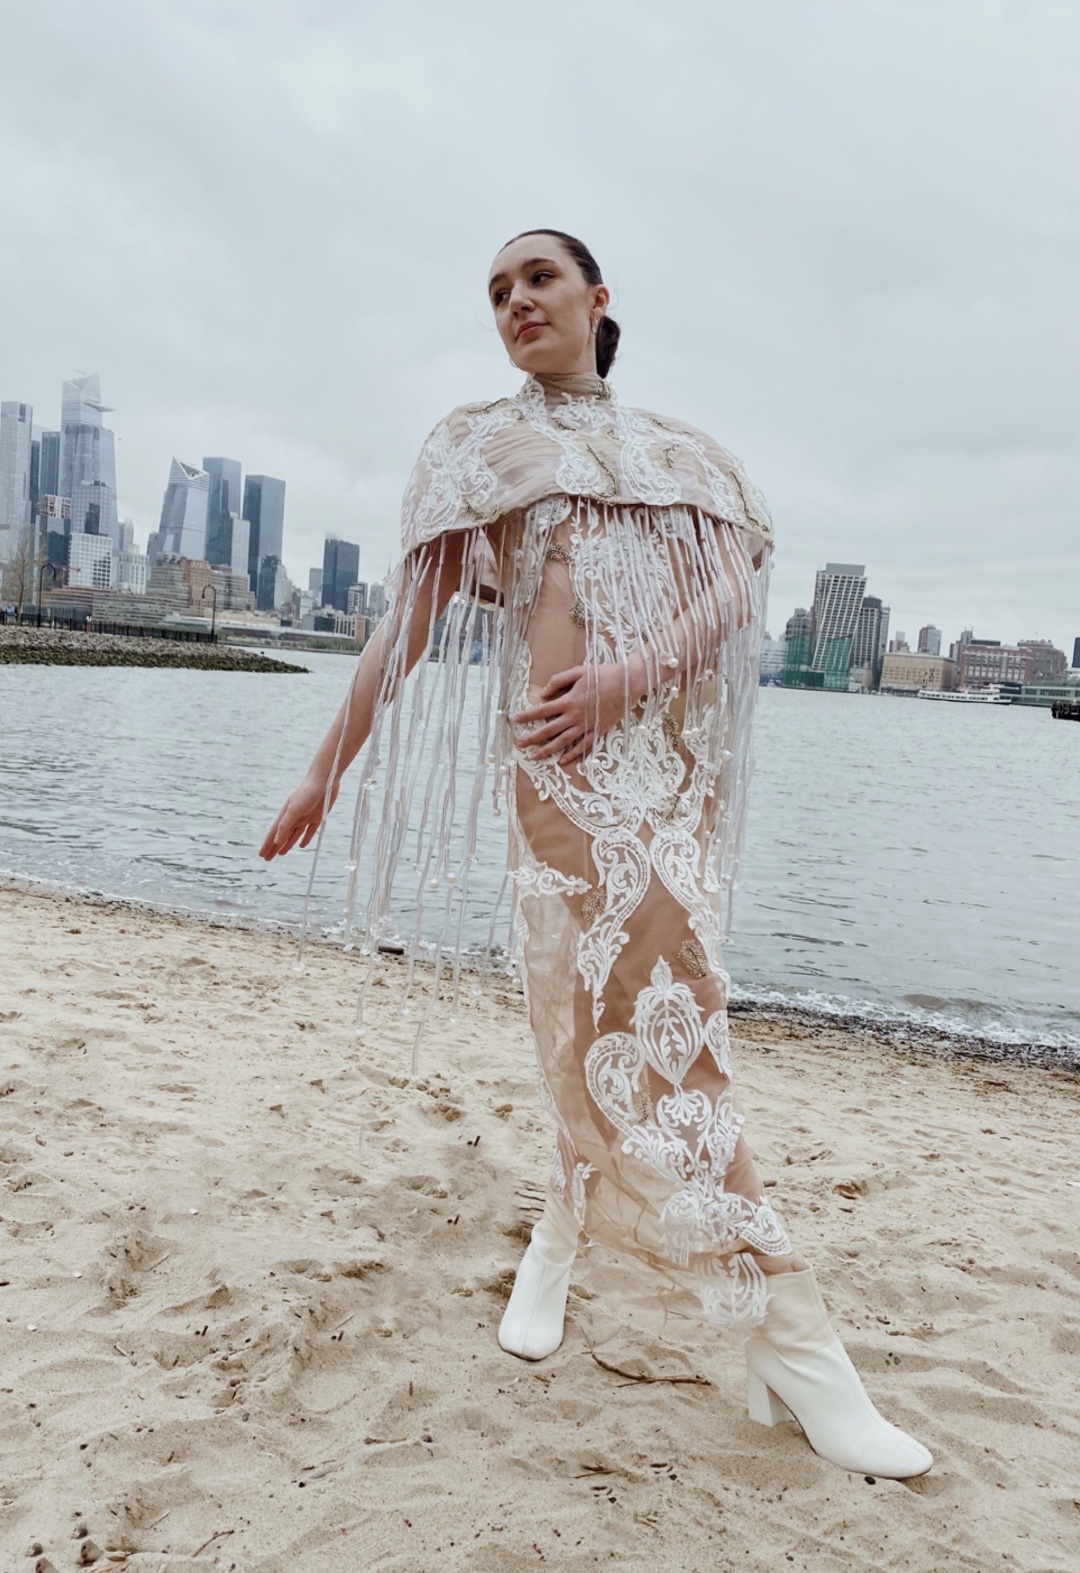 The garment is inspired by ocean pollution. Using recycled plastics and repurposed bridal fabrics, the look highlights waste in the fashion industry and beyond. The cape is modeled after a jelly fish, using beads that I created from plastic water bottles to make the tentacles. The ocean wave–inspired lace appliqués highlight the impact that waste has on our oceans and its creatures.